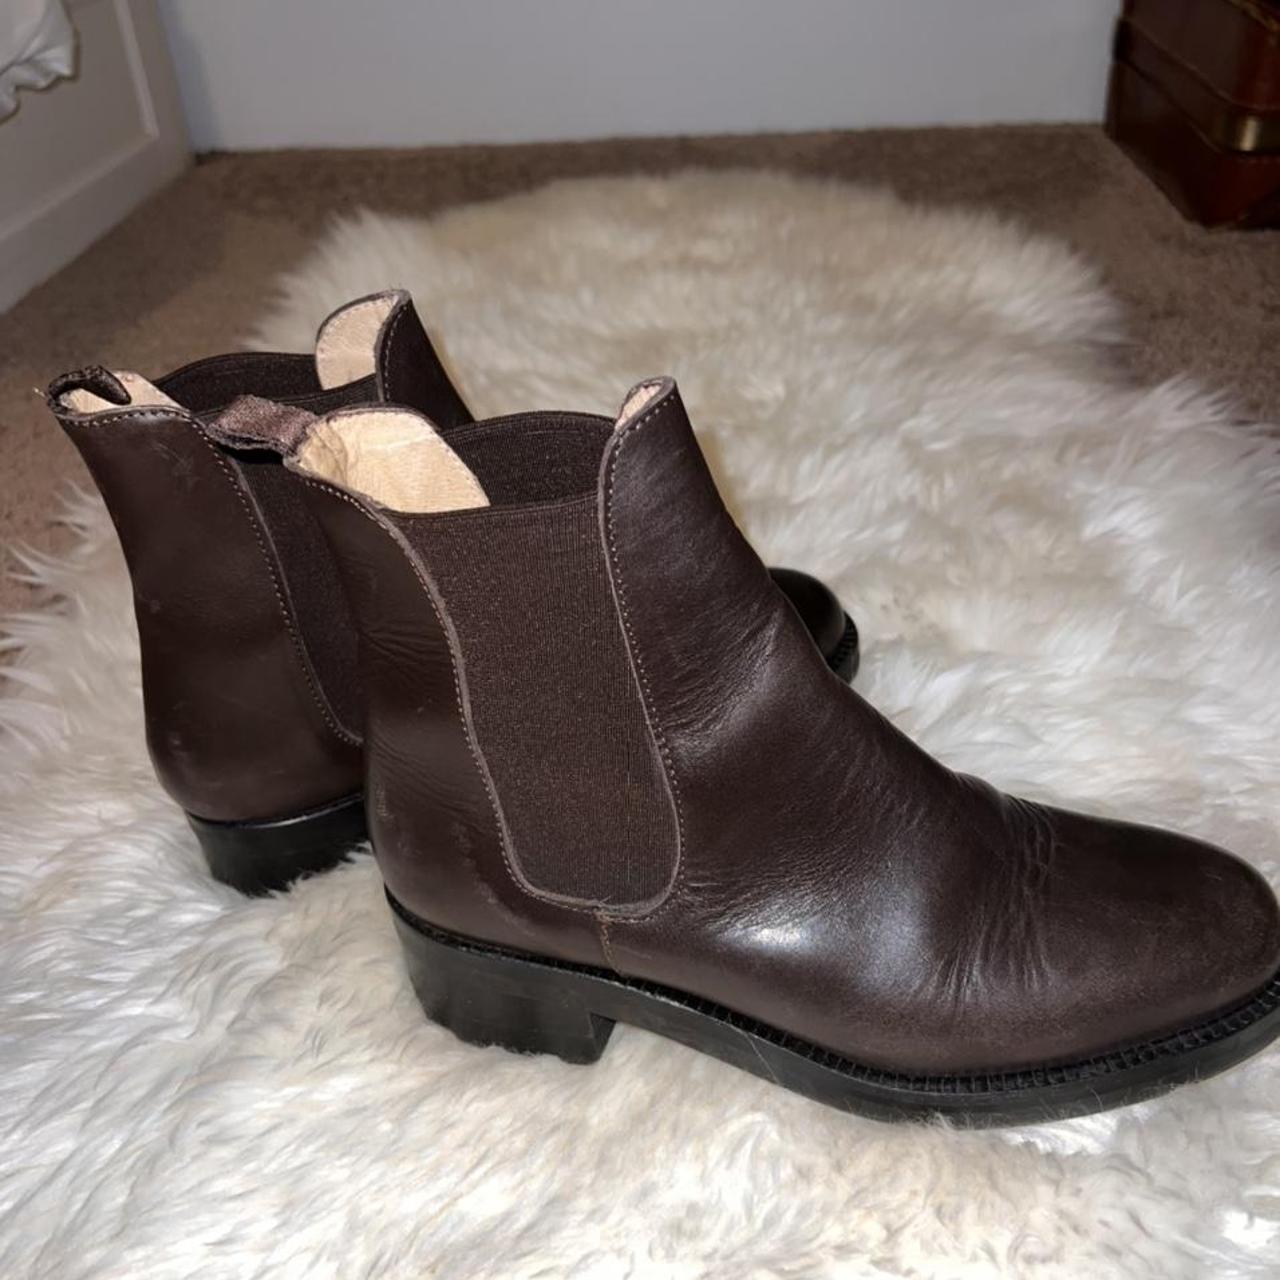 Barney's Women's Brown and Black Boots